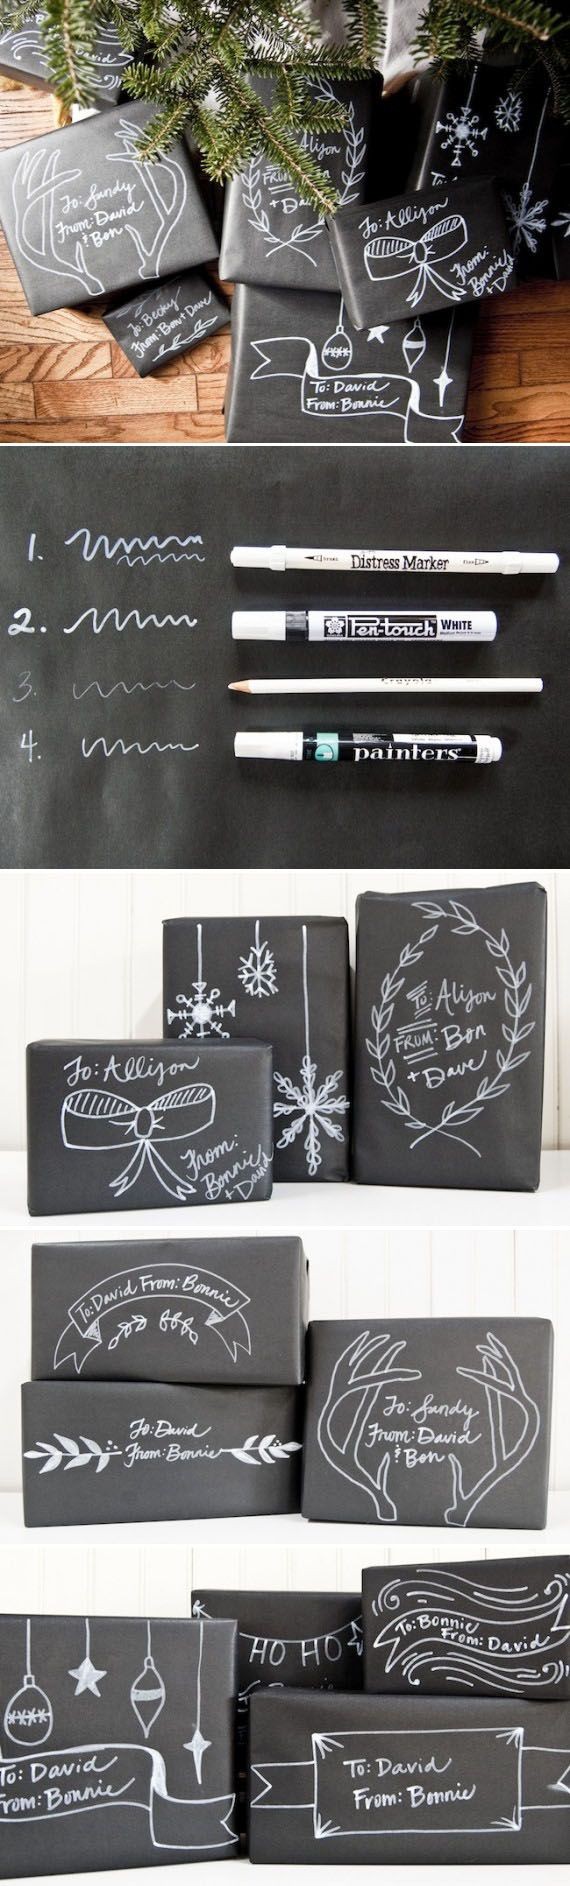 DIY Christmas Chalkboard Gift Packaging with an 'i...